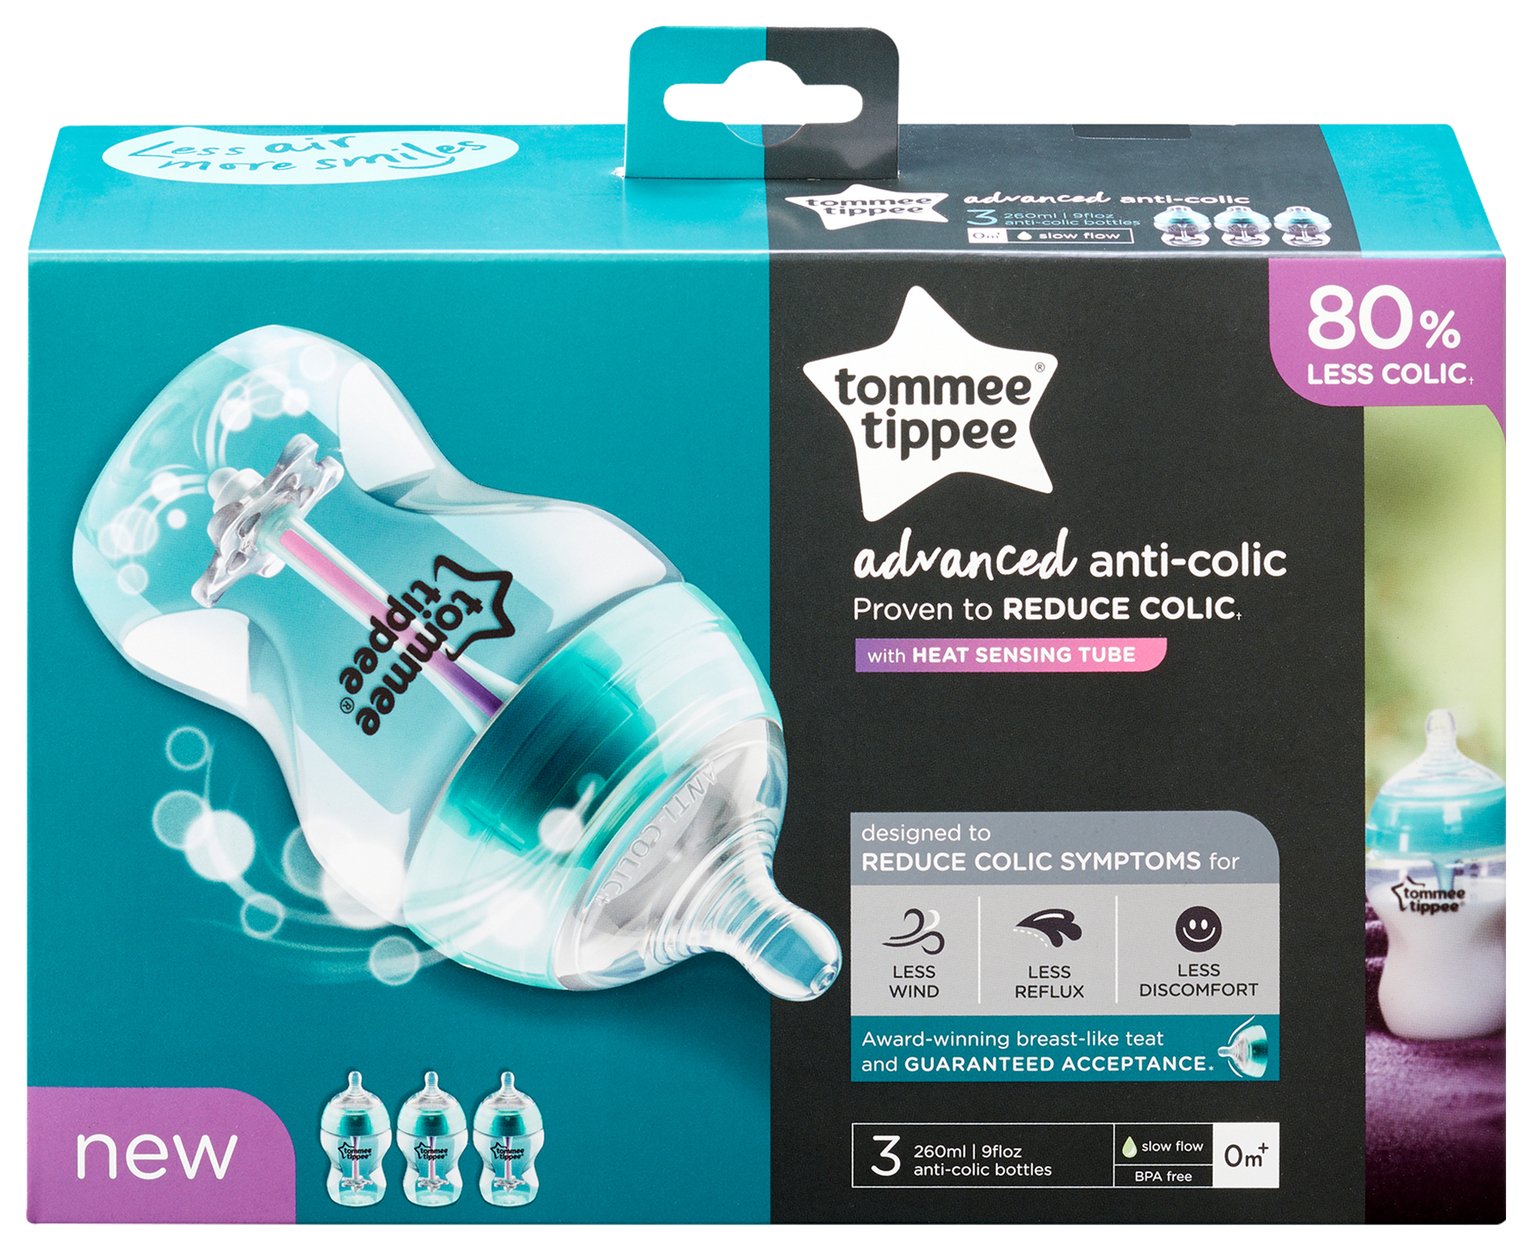 Tommee Tippee Anti-Colic Bottles Review